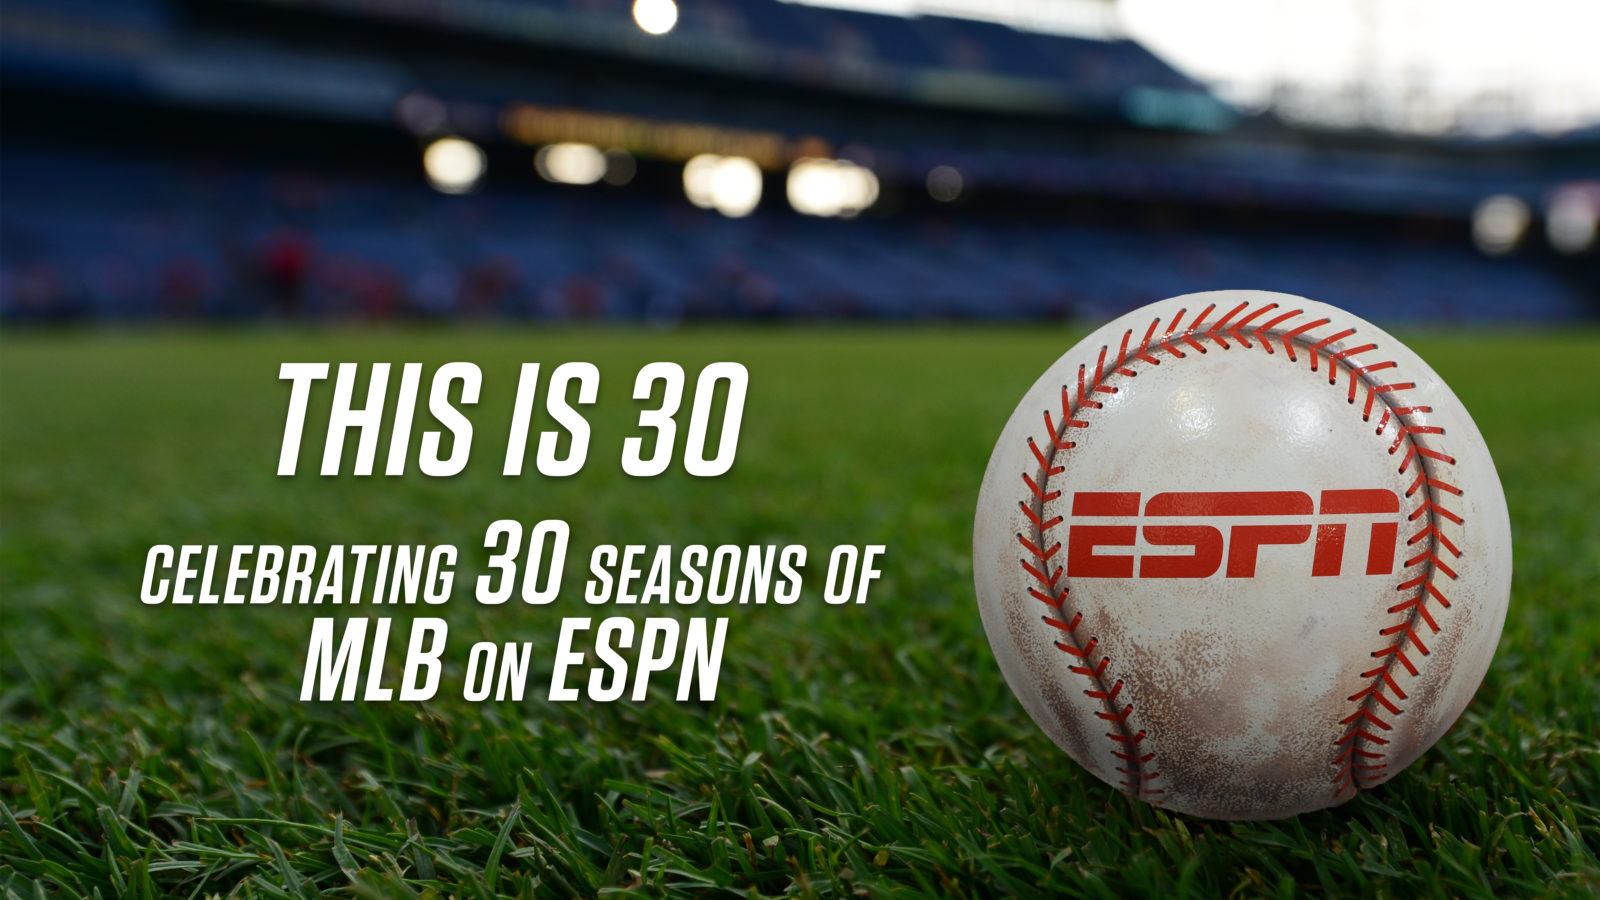 ESPN is the last media company to renegotiate with MLB